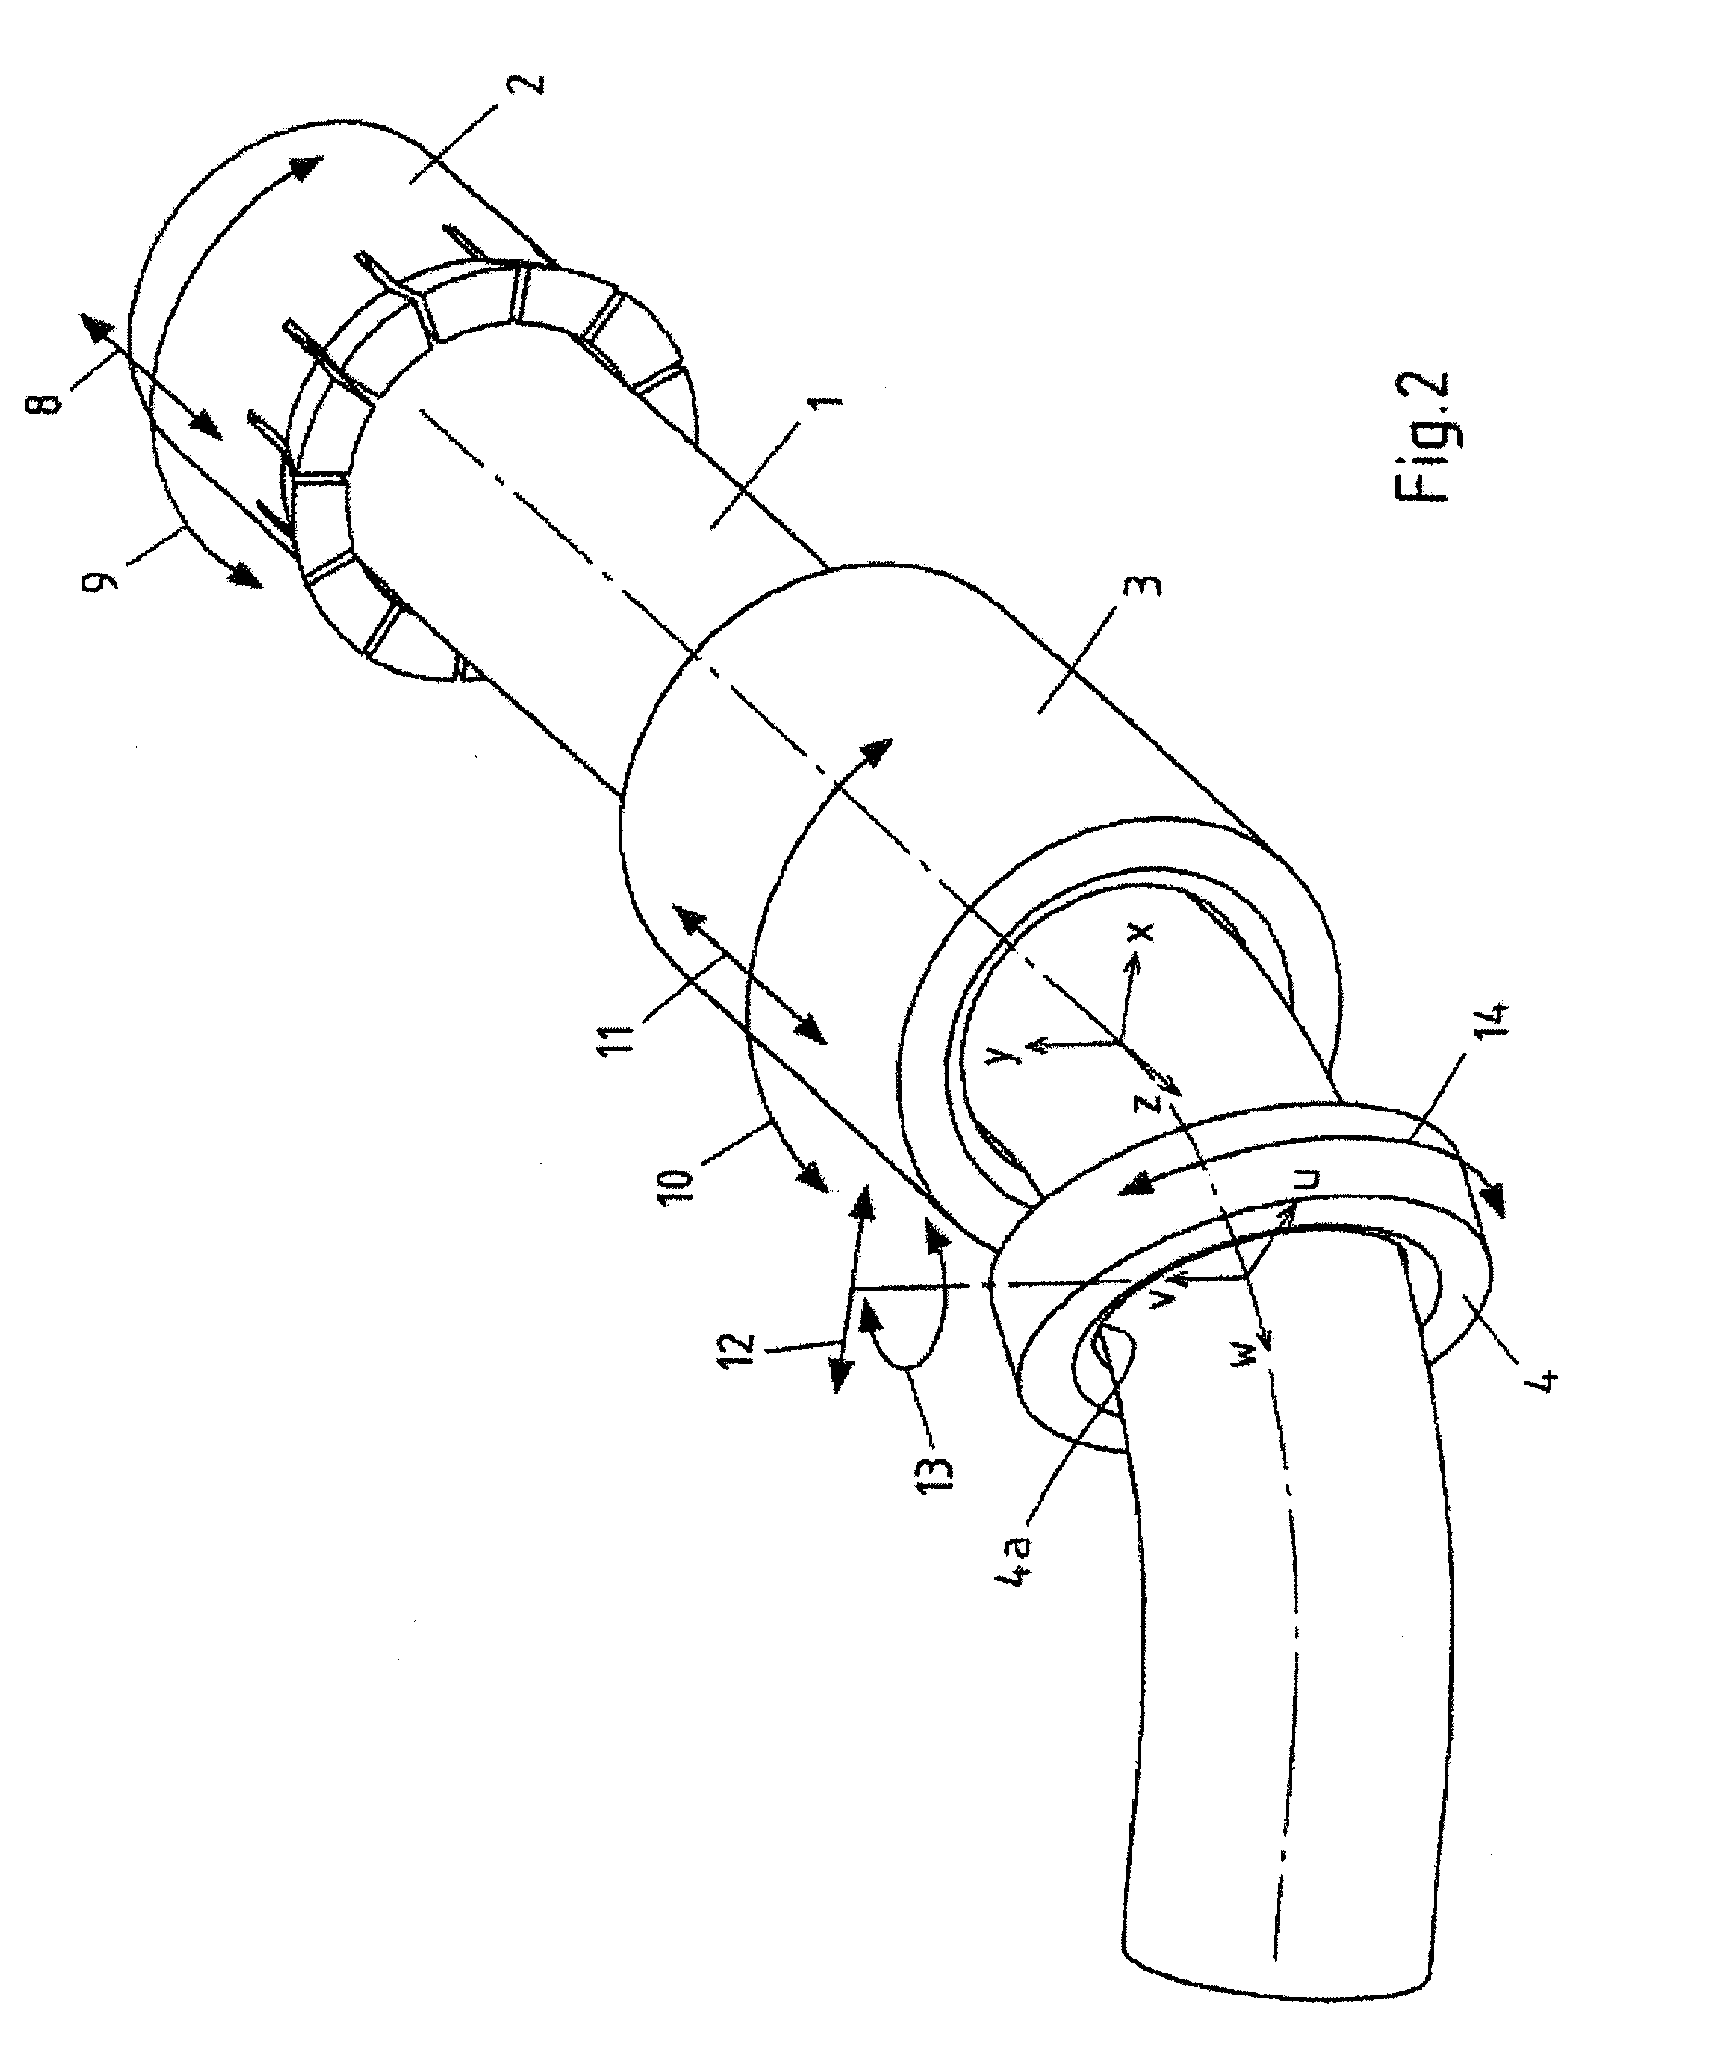 Device for the Free Forming and Bending of Longitudinal Profiles, Particularly Pipes, and a Combined Device for Free Forming and Bending As Well As Draw-Bending Longitudinal Profiles, Particularly Pipes